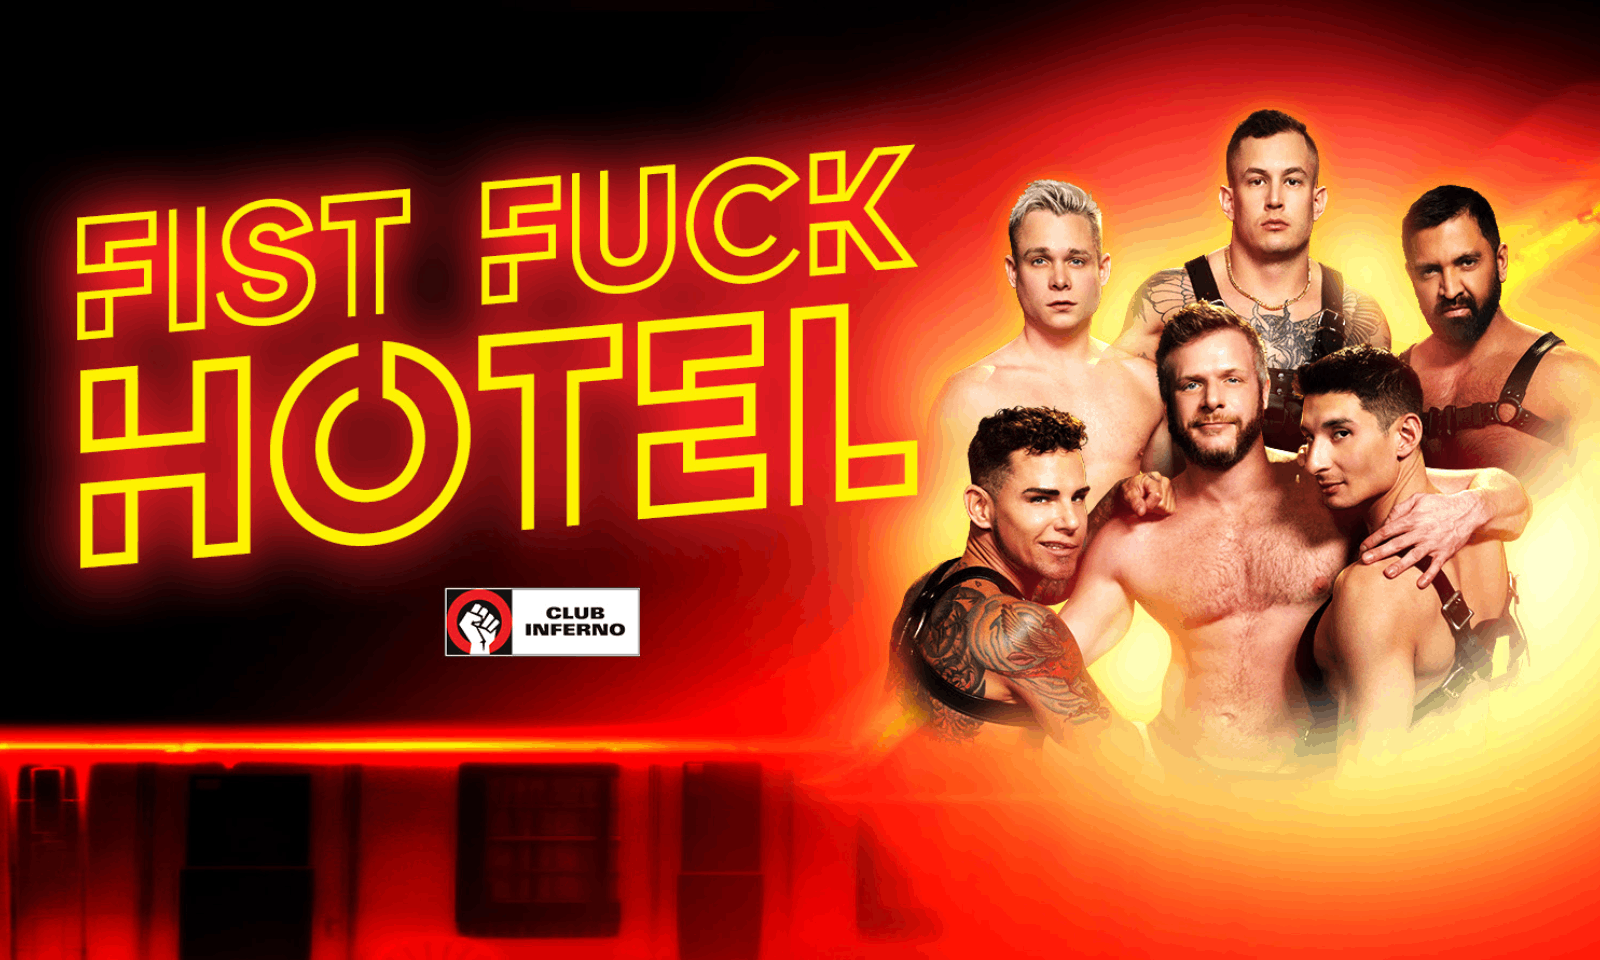 Club Inferno Unveils New Title 'Fist Fuck Hotel'